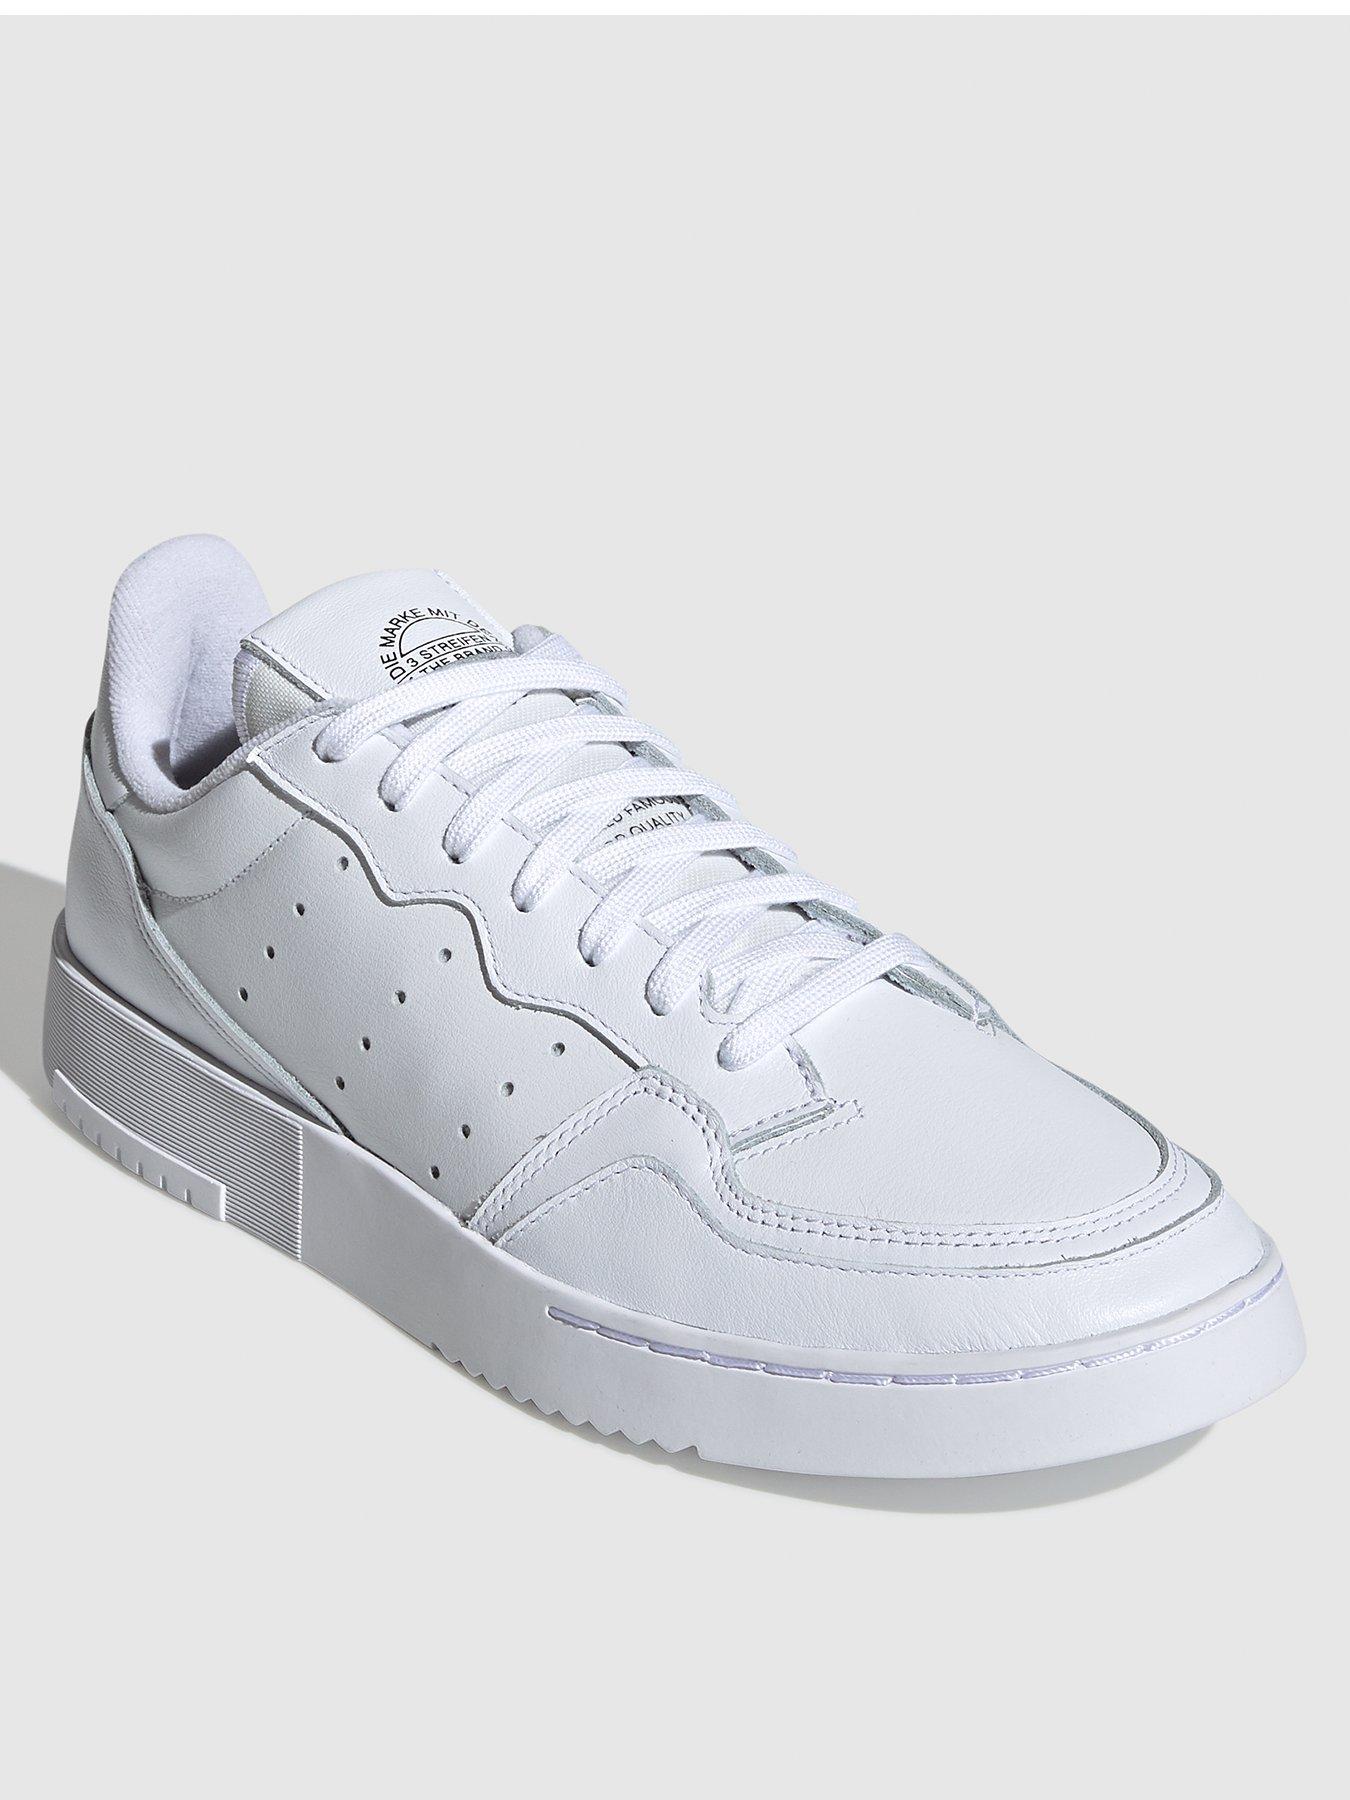 adidas originals supercourt trainers in white with cord heel tab